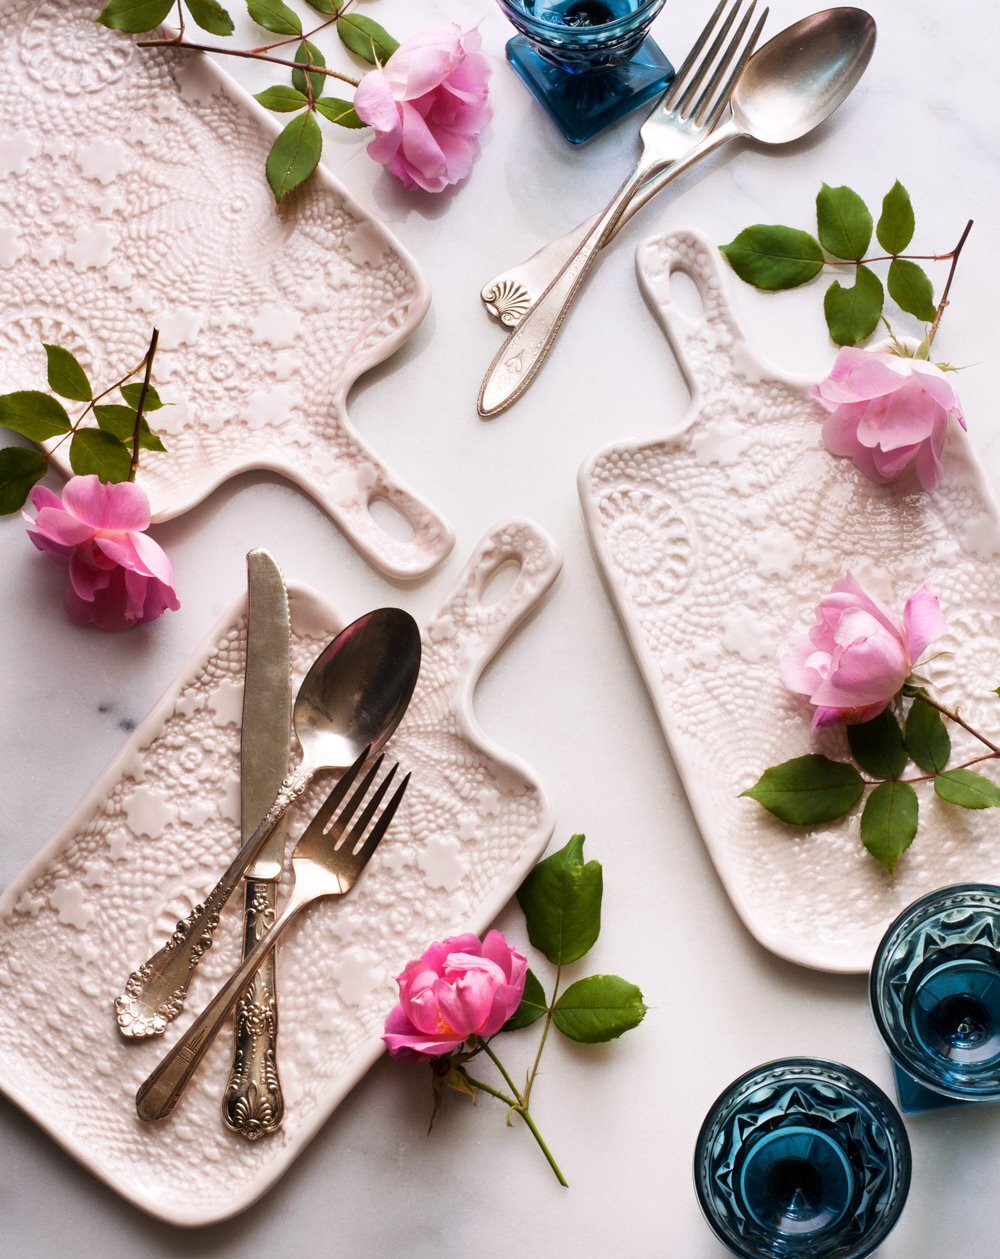 https://images.squarespace-cdn.com/content/v1/5f4d07a53aba796c17bbac61/1616791478062-WPFJB5EY8AEUIDSX30XL/suite-one-studio-lace-cheeseboard-with-blue-glassware-and-roses_dc08dff9-69ed-4aed-ad38-cec0154b0593.jpg